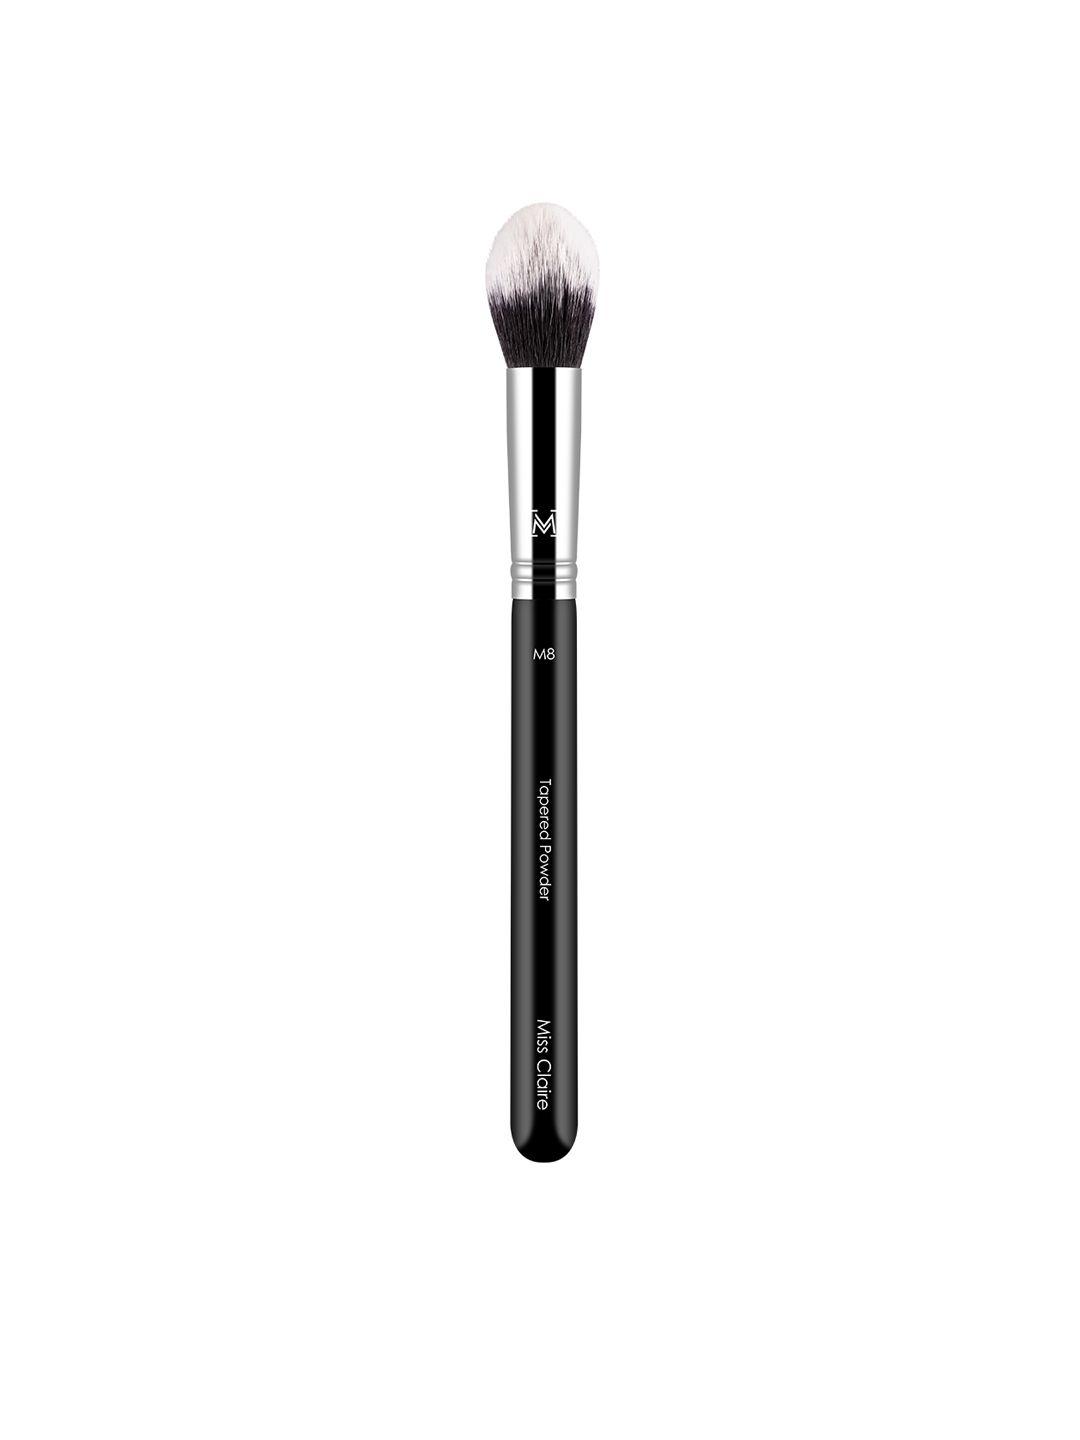 miss claire chrome tapered powder brush - m8 black & silver toned